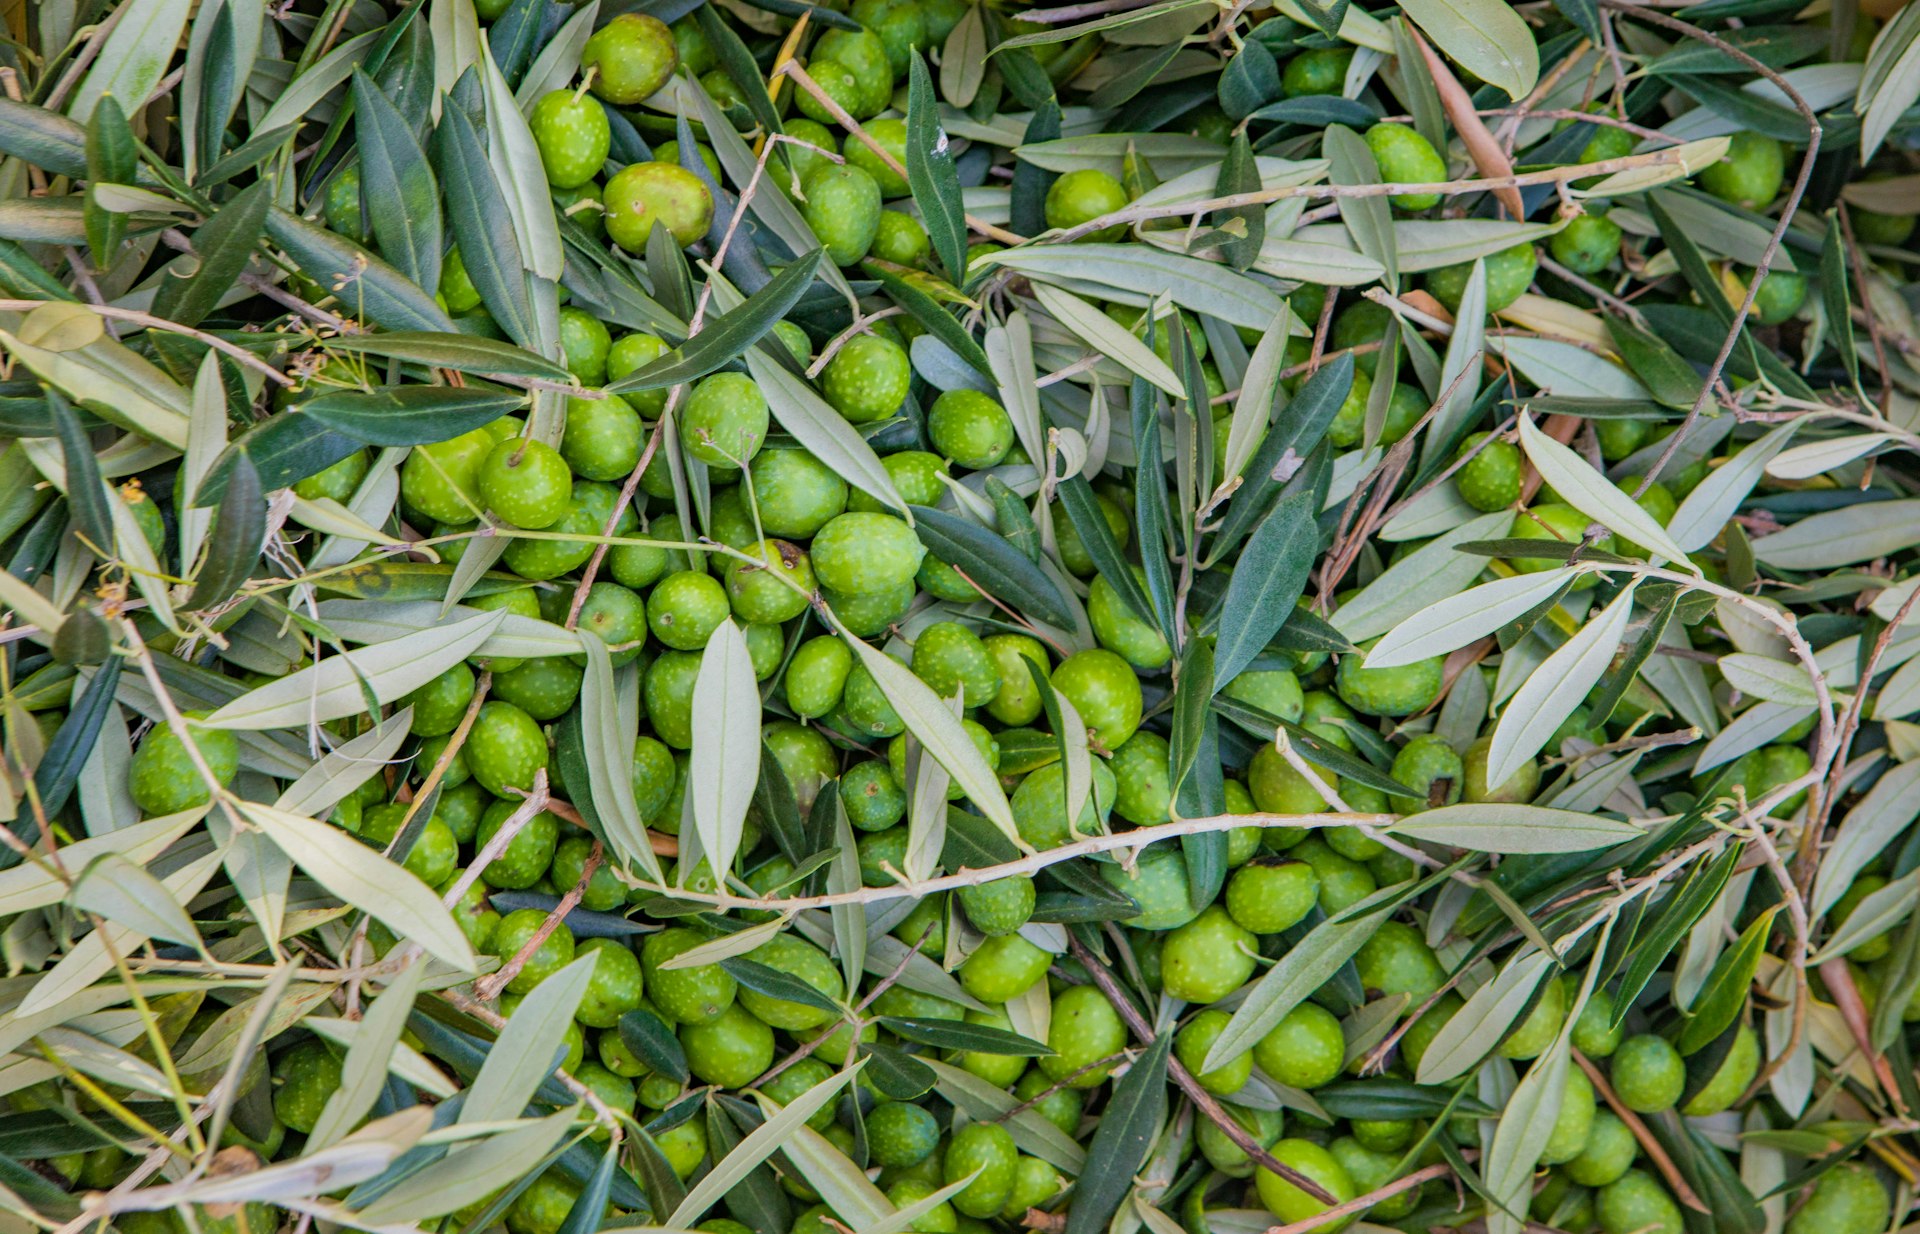 A heap of light, bright green olives softly dotted with sage green spots sit mixed with slender branches and deeper green leaves that have silvery undersides